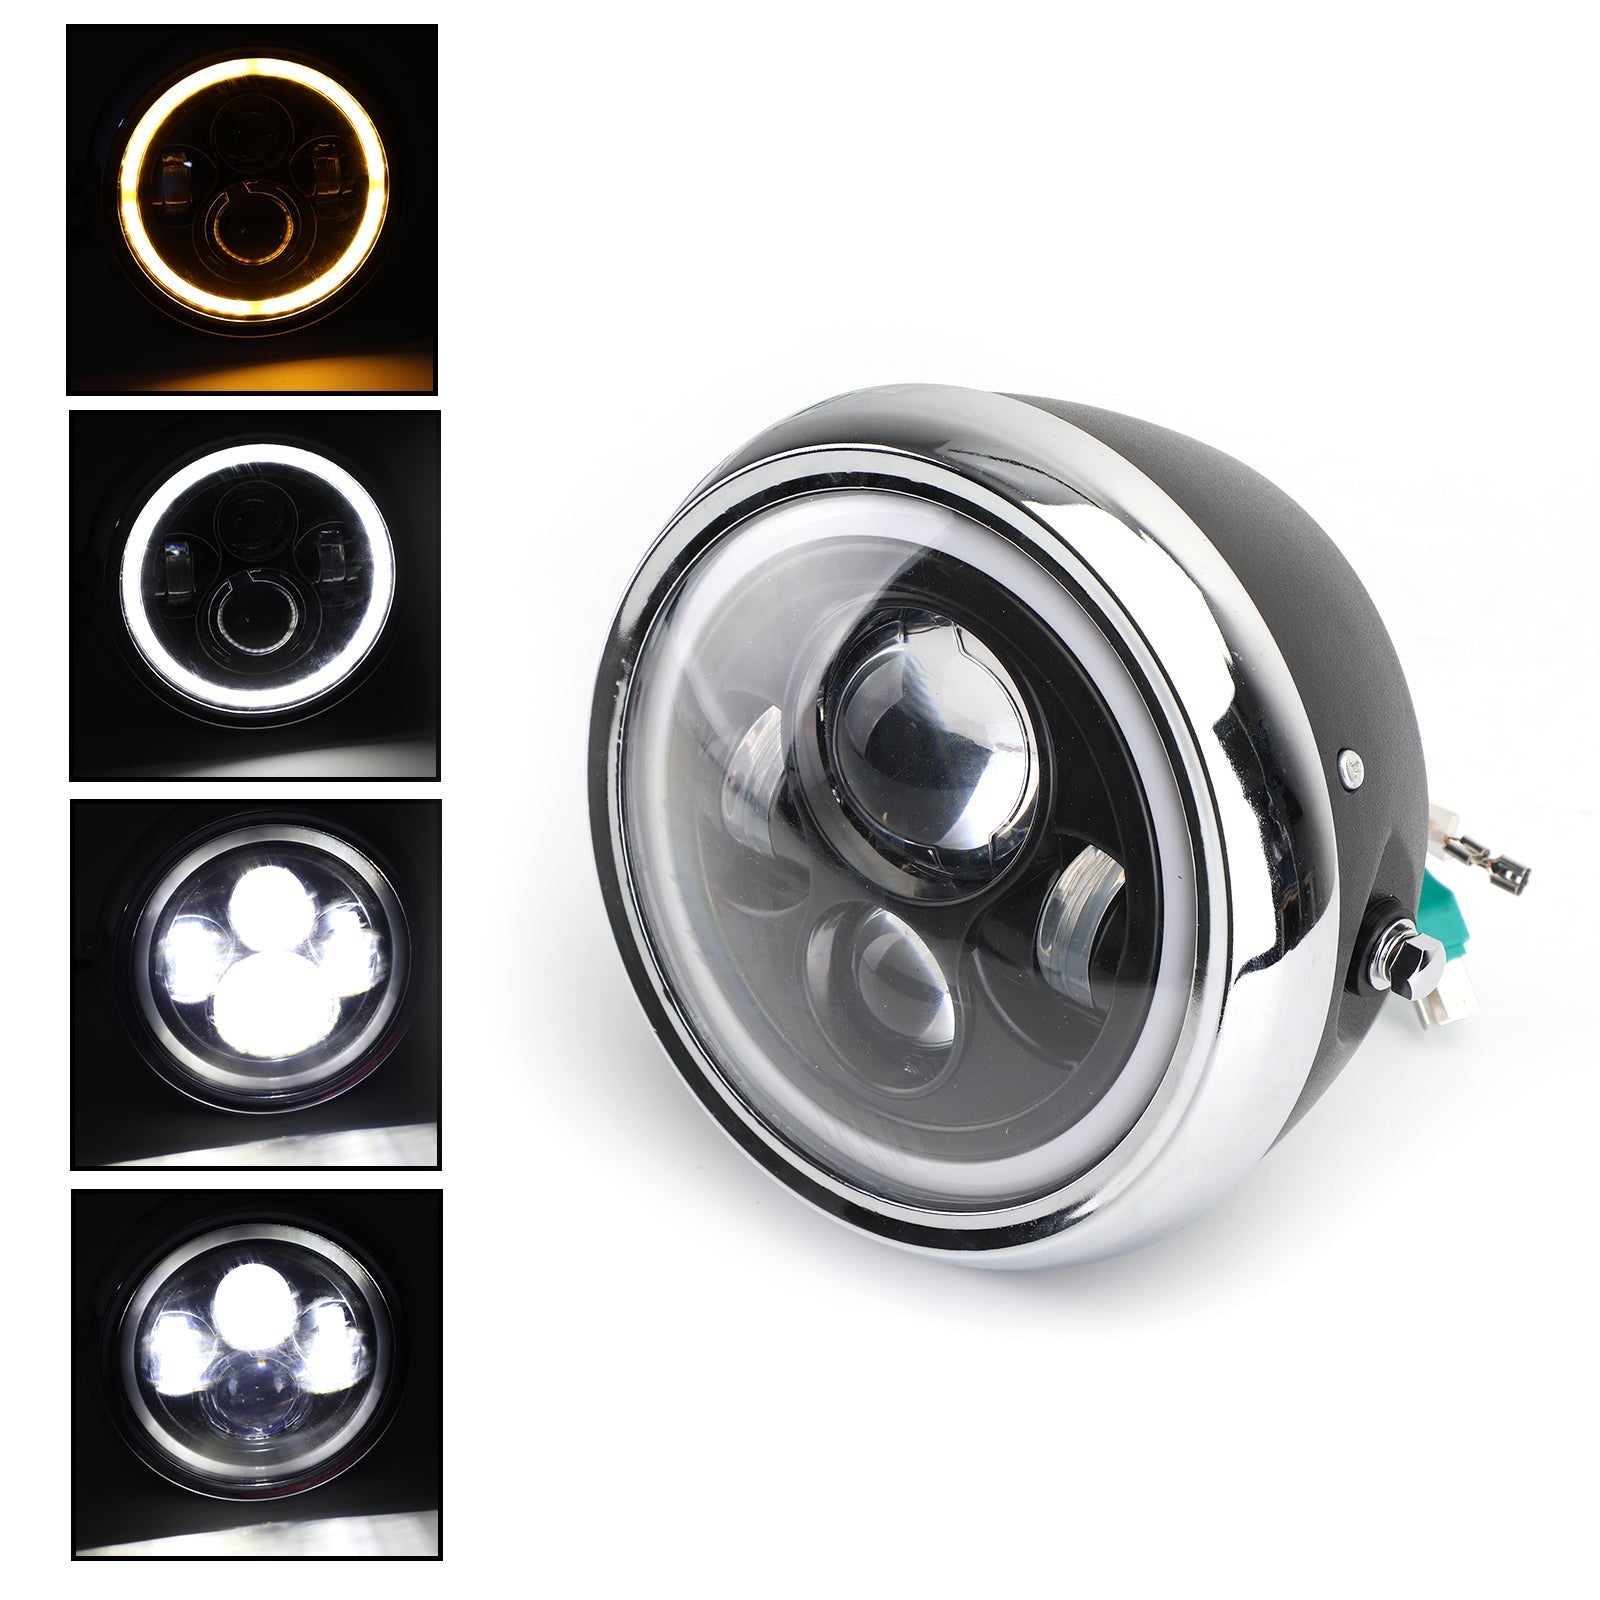 7 Inch LED Headlight Hi/Lo+Turn Signal+DRL for Motorcycle Dyna Cafe Racer Bobber